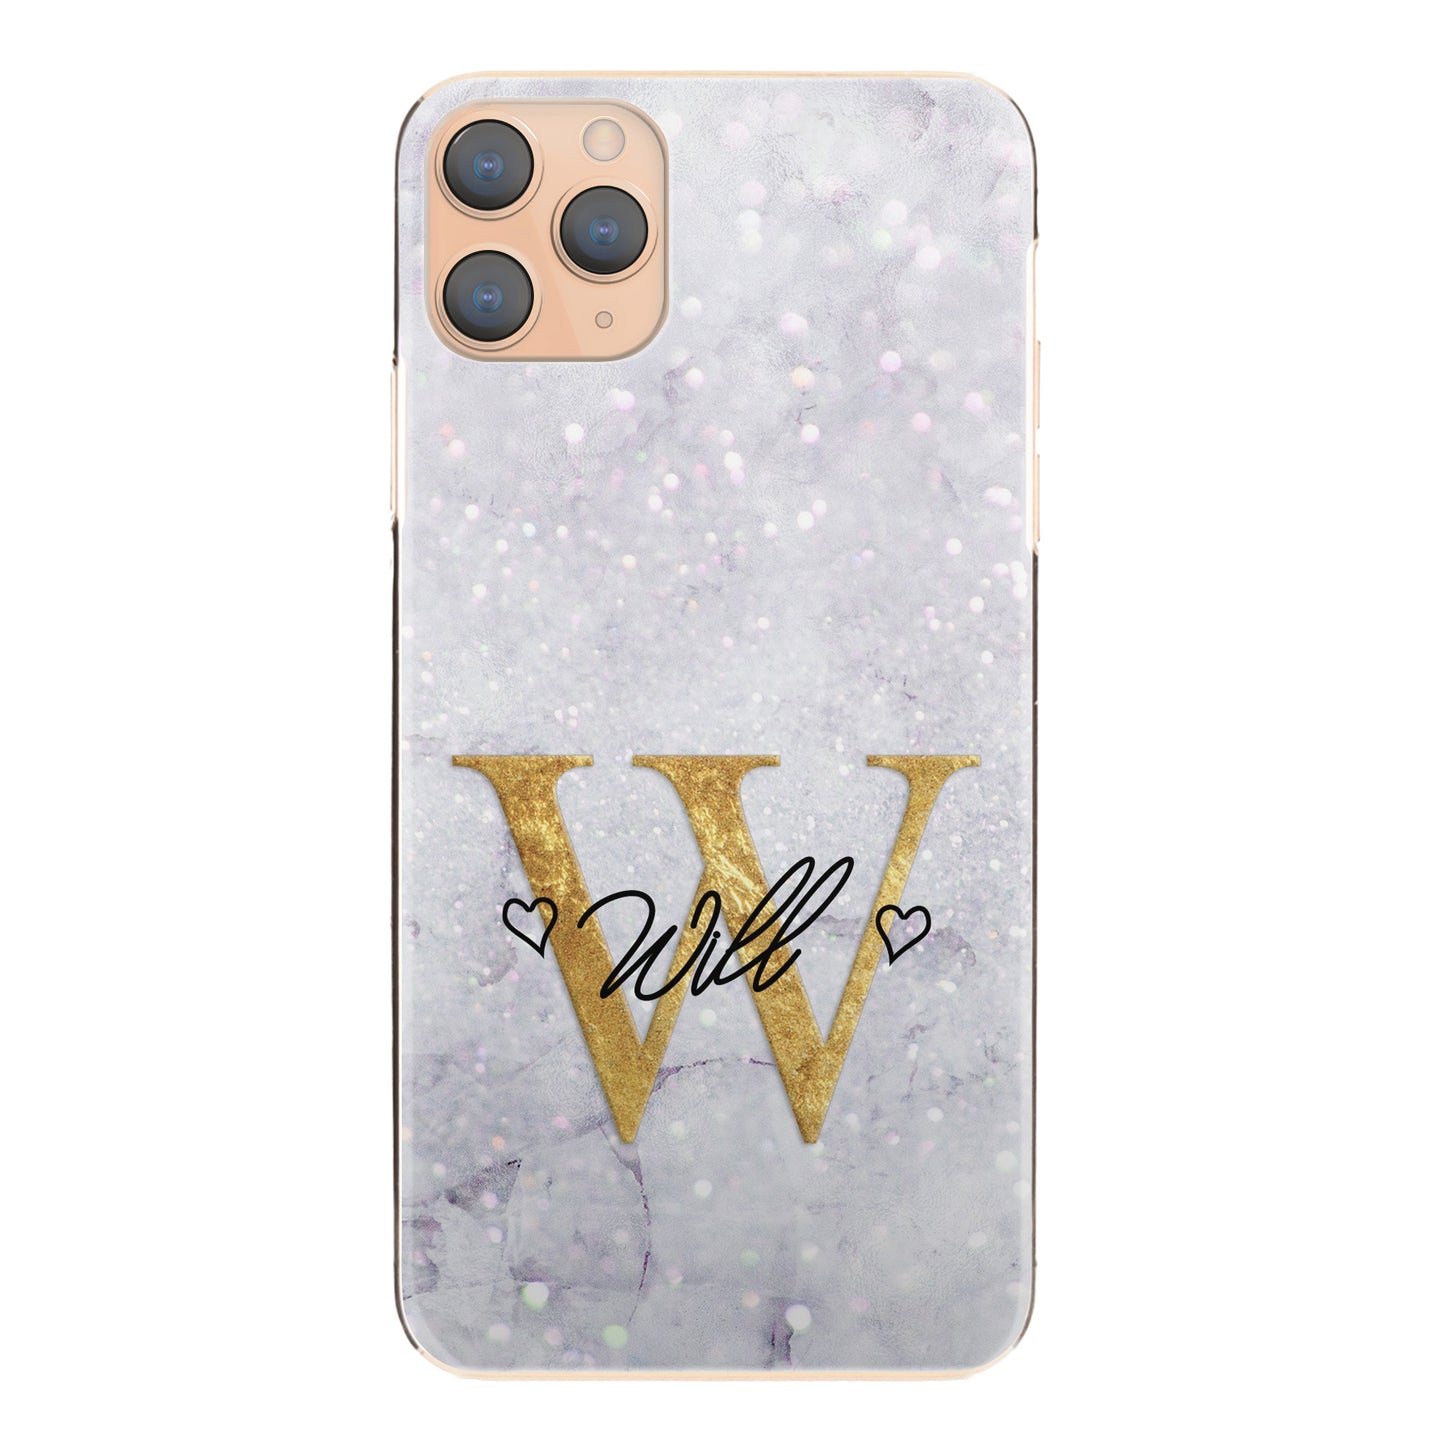 Personalised Motorola Phone Hard Case with Gold Initial and Heart Accented Text on Crystal Marble